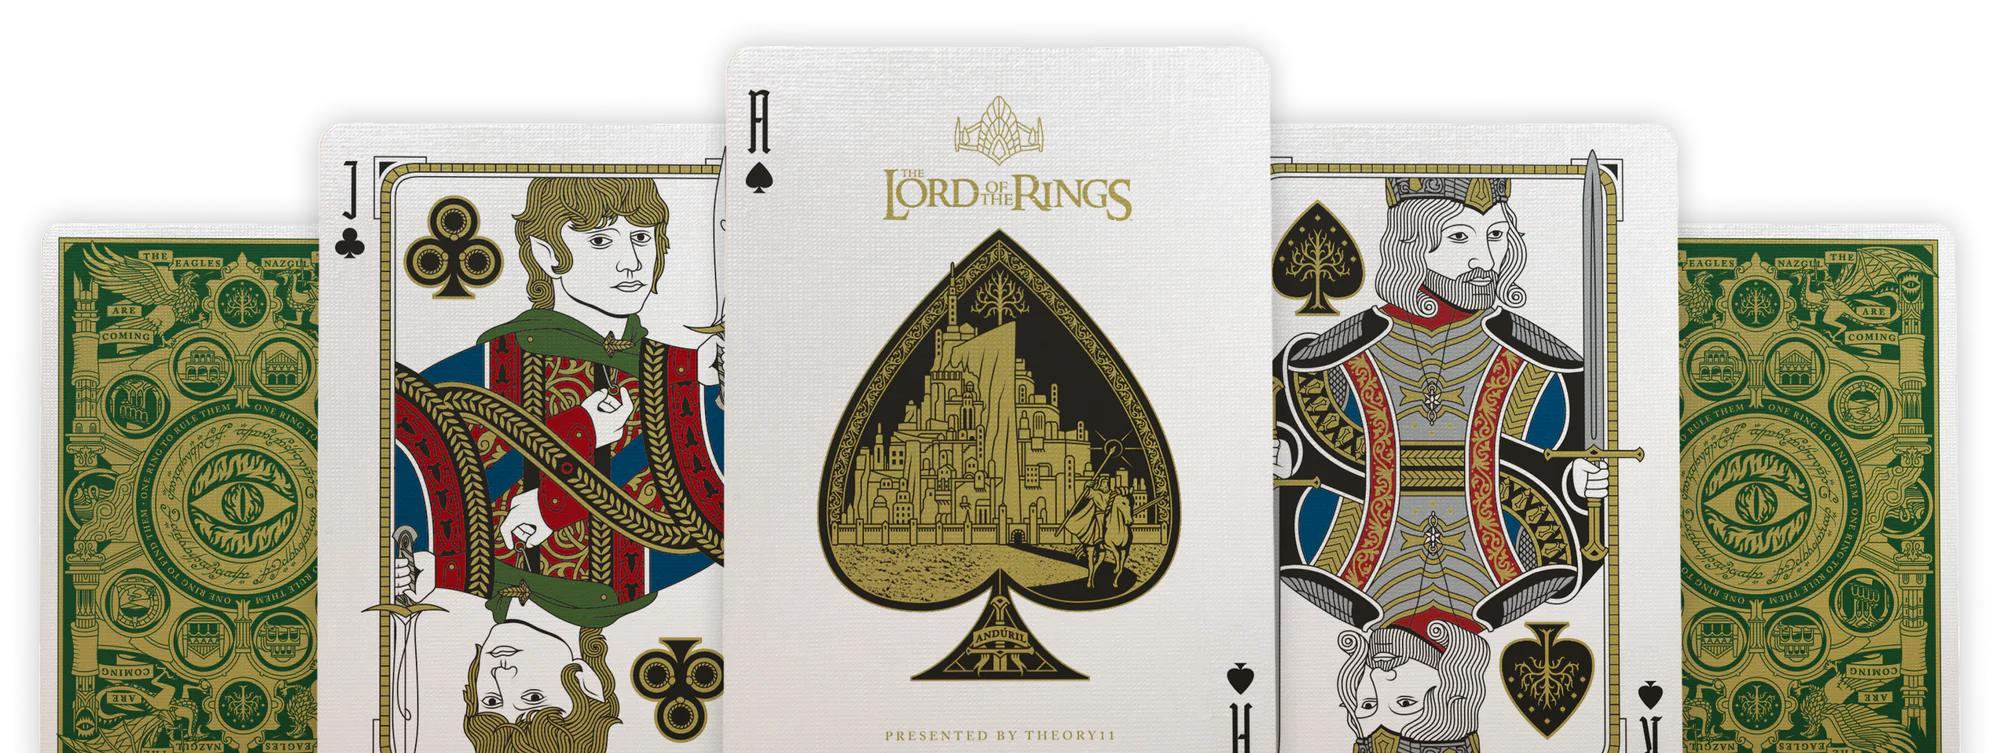 Bicycle Playing Cards: Theory 11 Lord of the Rings - Bards & Cards